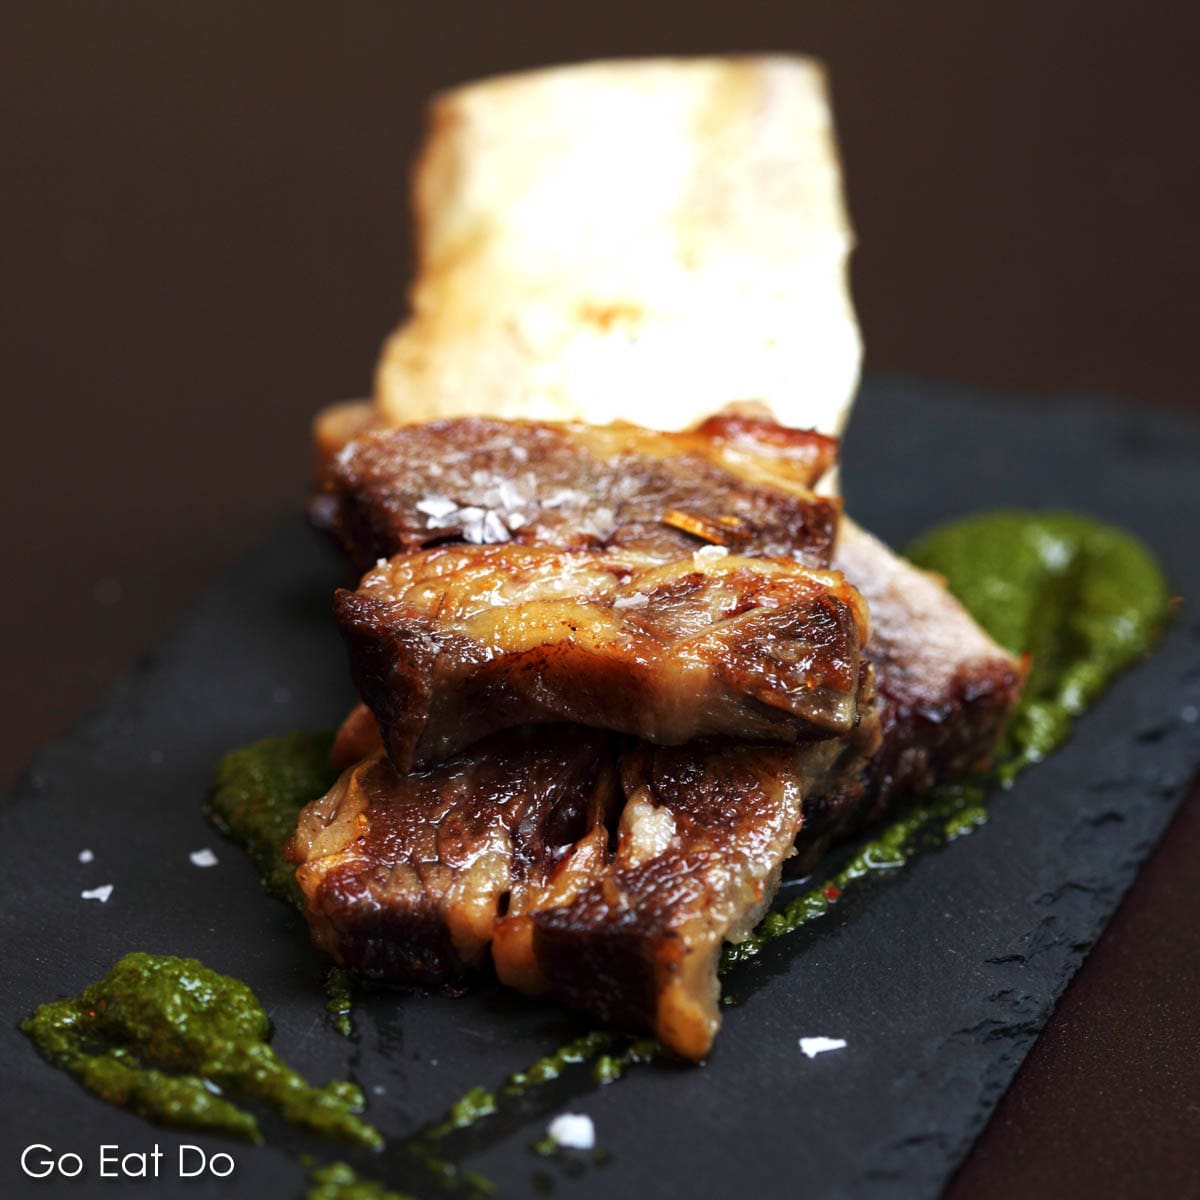 Slow-cooked short ribs served with green mojo sauce at Ibérica La Terraza, a Spanish restaurant at Canary Wharf, London.